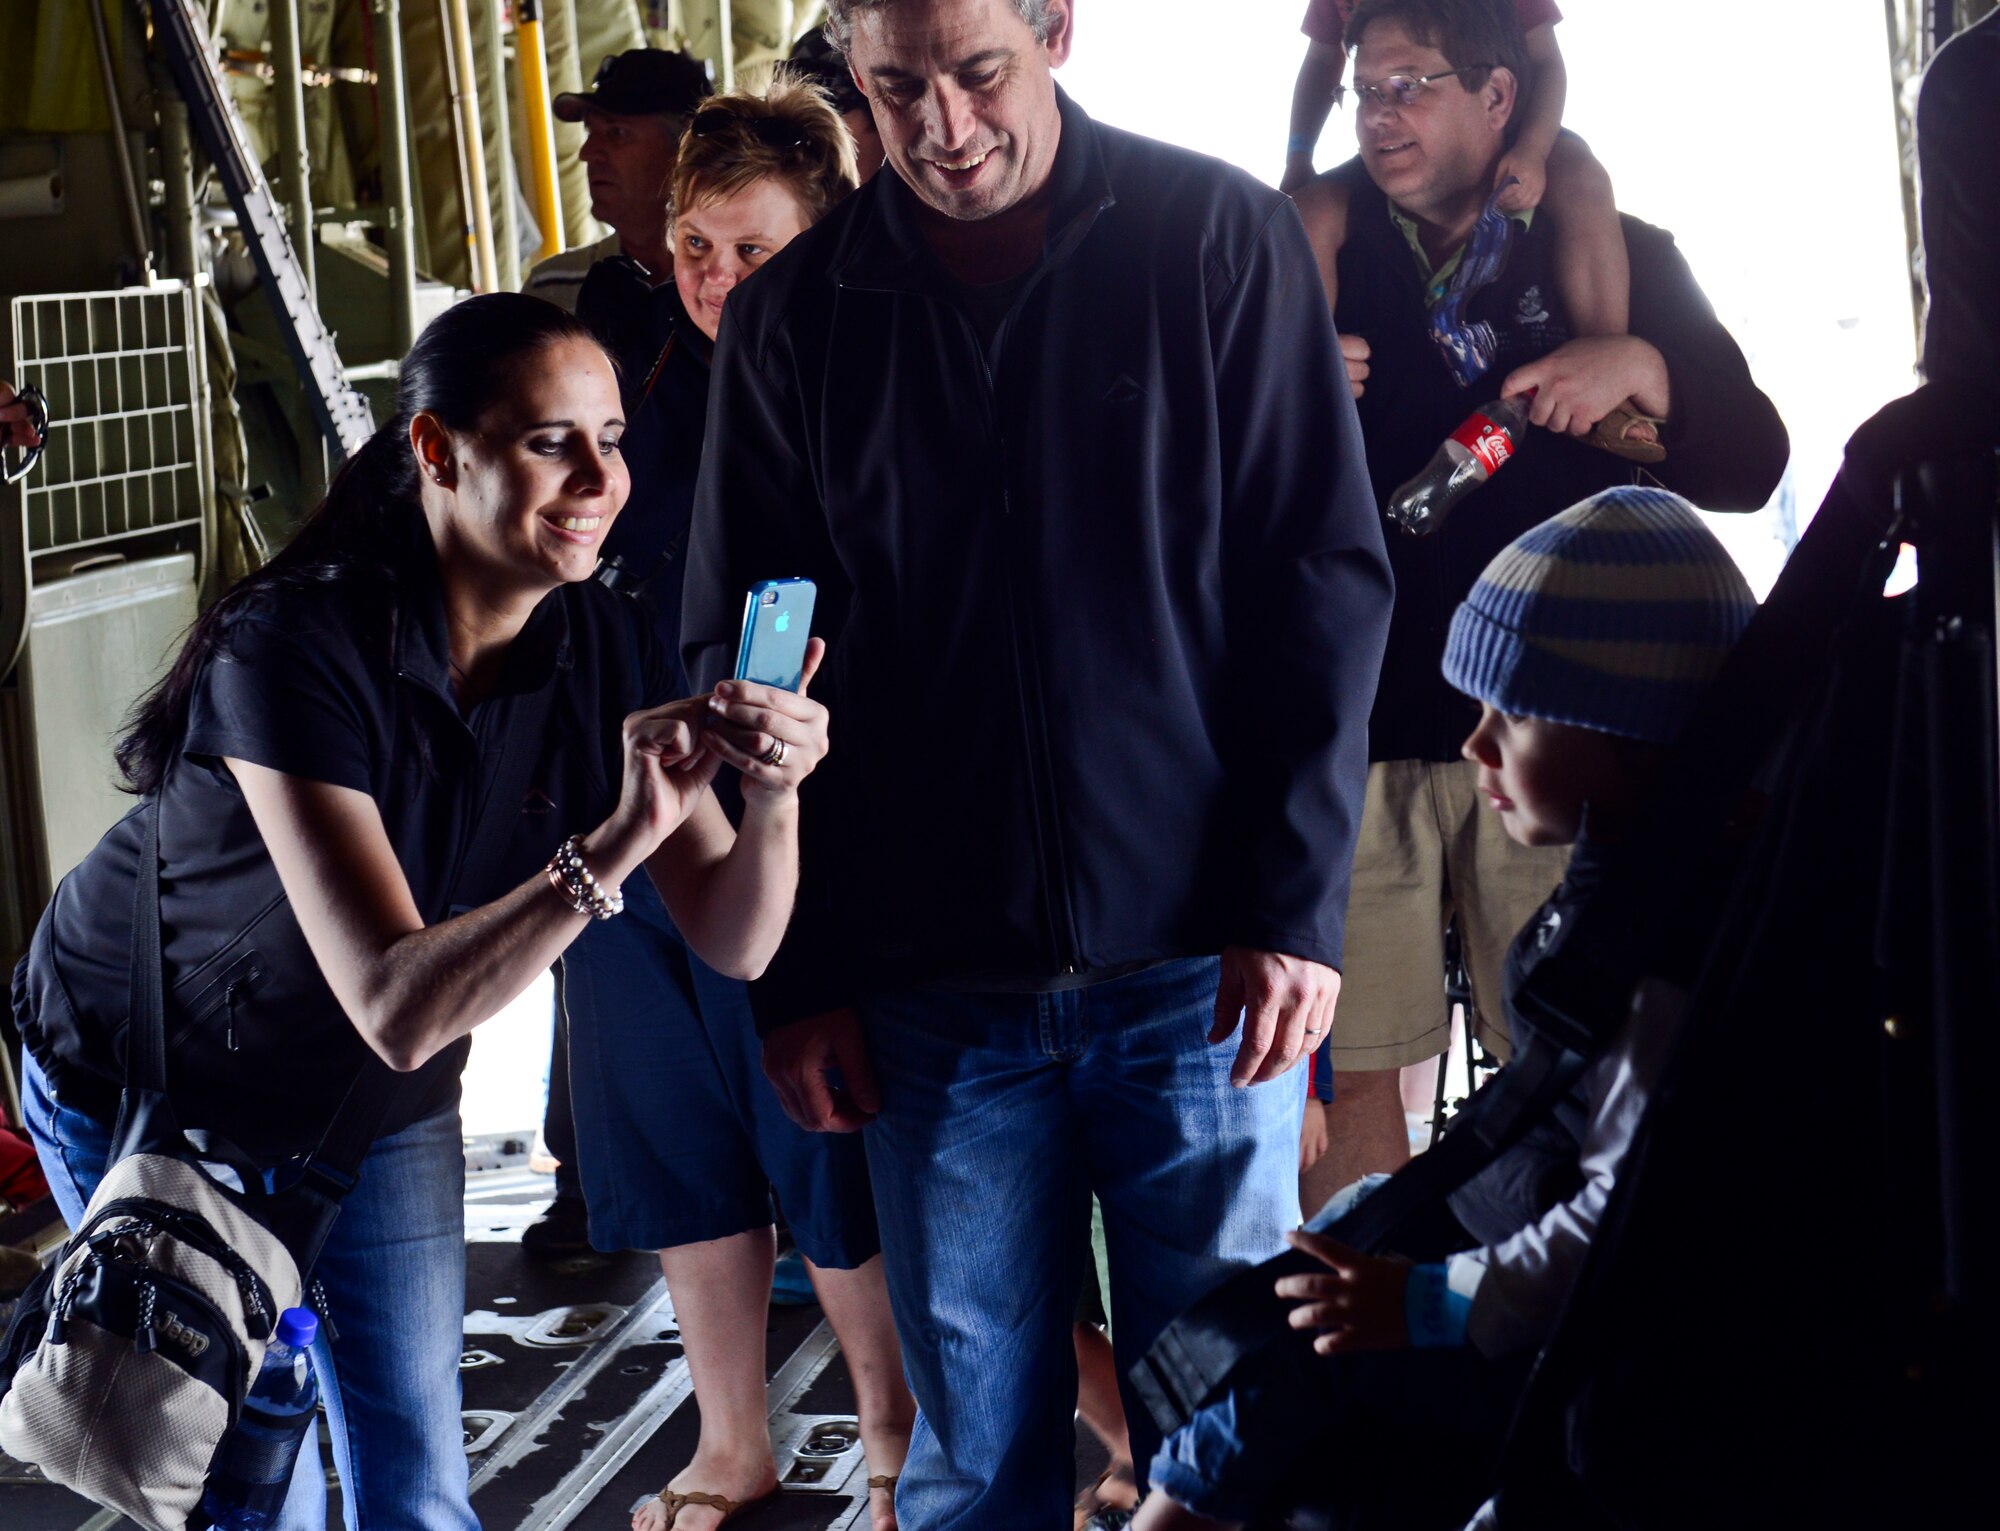 A happy mother takes a photo of her child aboard a C-130J Super Hercules at the Africa Aerospace & Defence Expo at Waterkloof Air Force Base, South Africa, Sept. 20, 2014.  The C-130 was part of a total-force team of Guard, Reserve and active-duty Soldiers and Airmen at the expo. Air show attendees were given an opportunity to view the inside of an Air Force C-130J and C-17 Globemaster III. (U.S. Air Force photo/Staff Sgt. Travis Edwards)